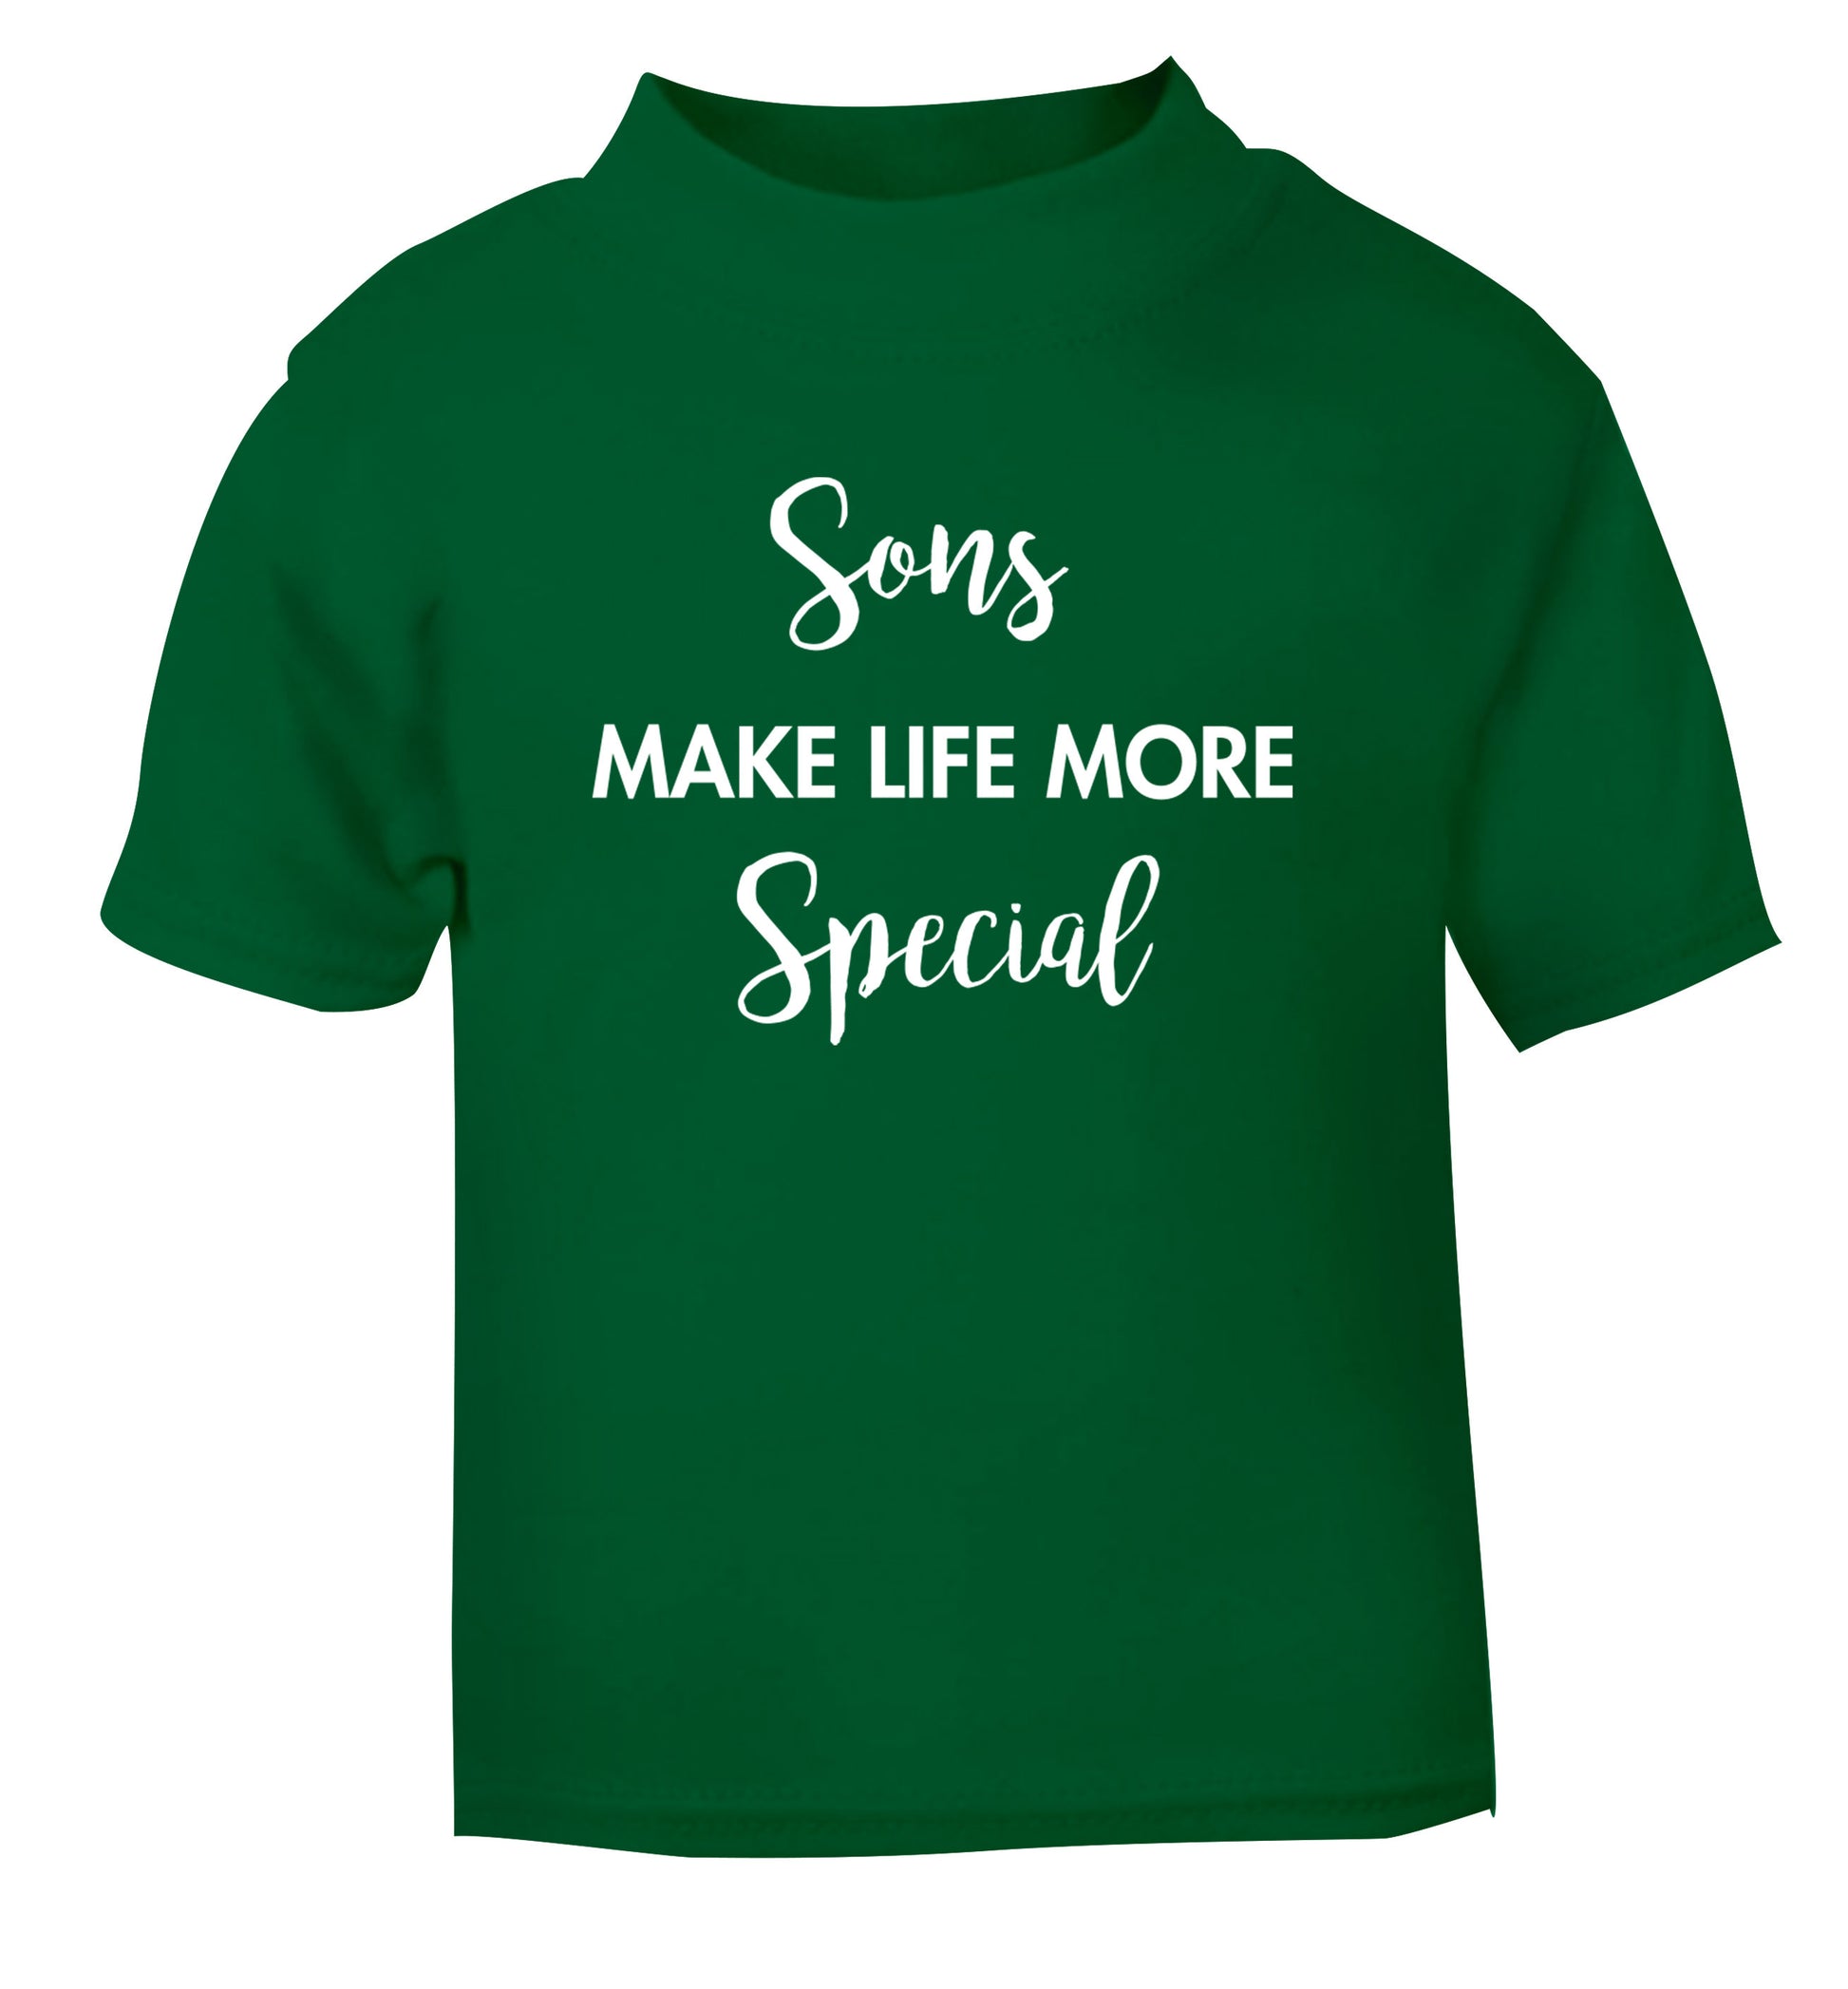 Sons make life more special green Baby Toddler Tshirt 2 Years